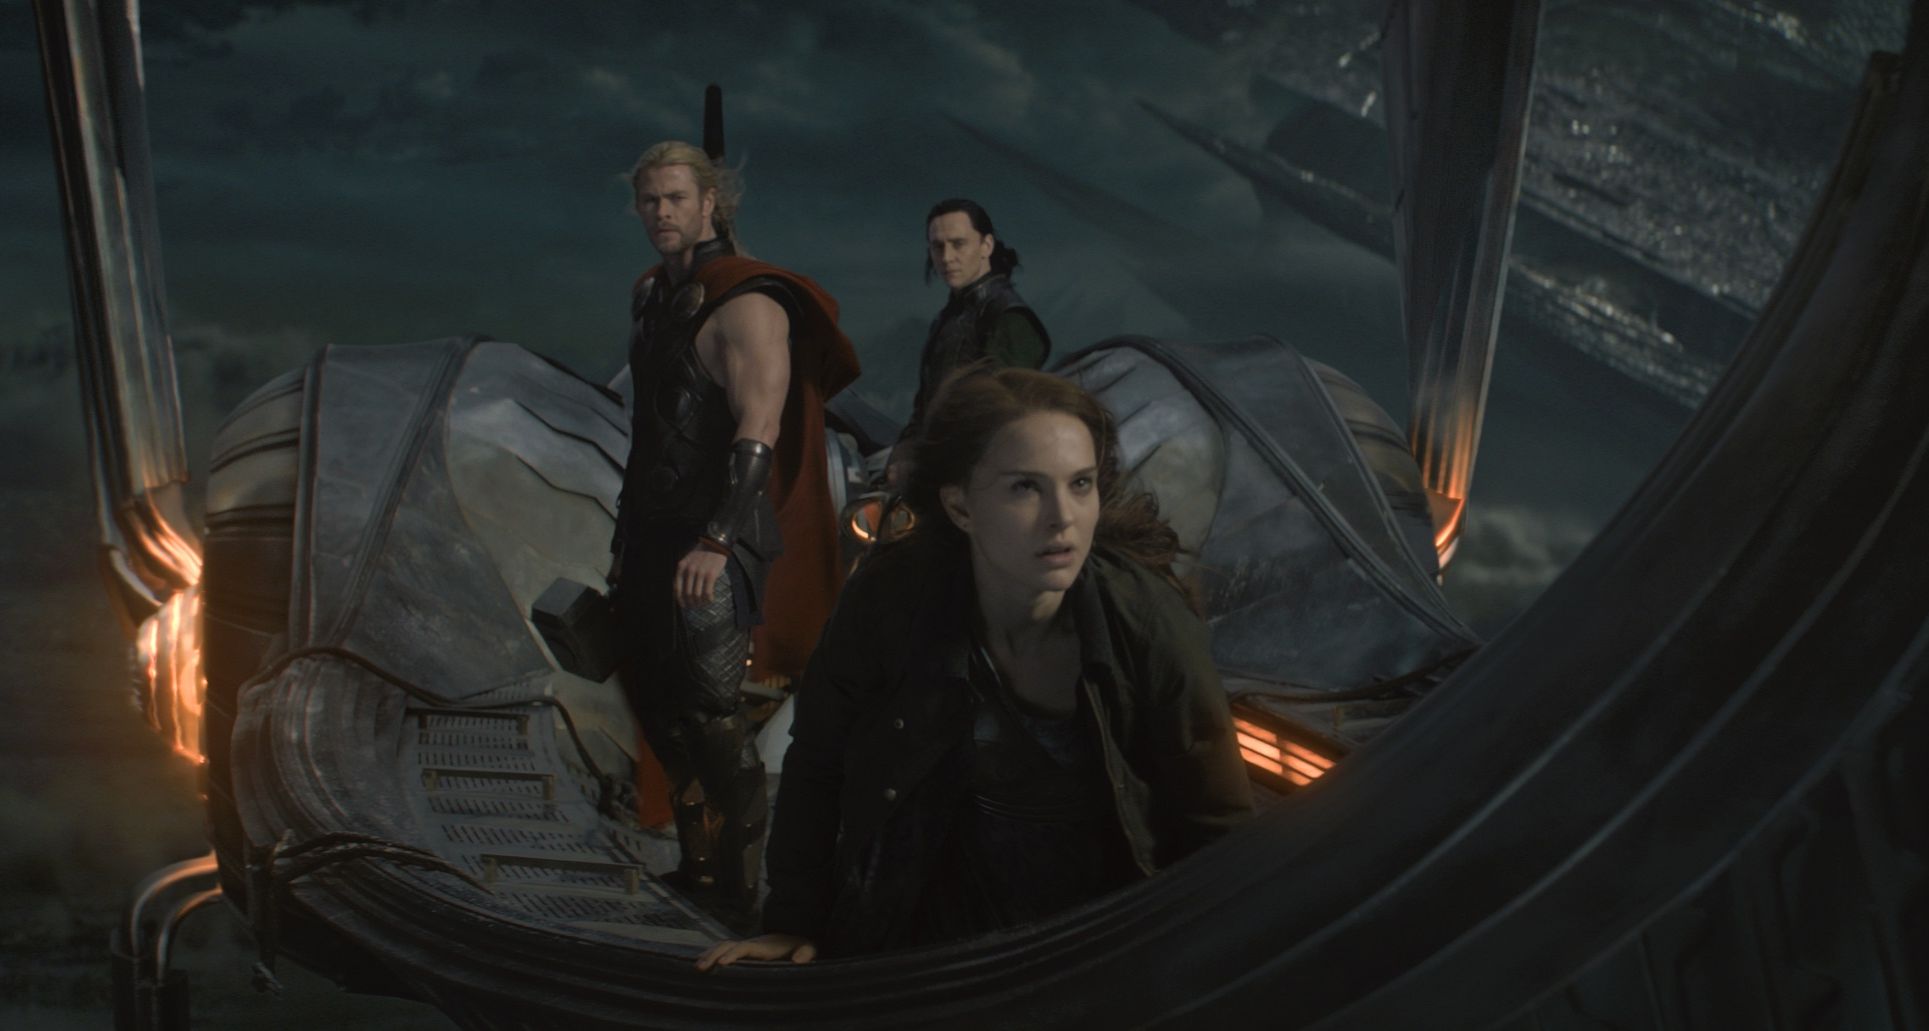 On an actual flying ship in Thor: The Dark World